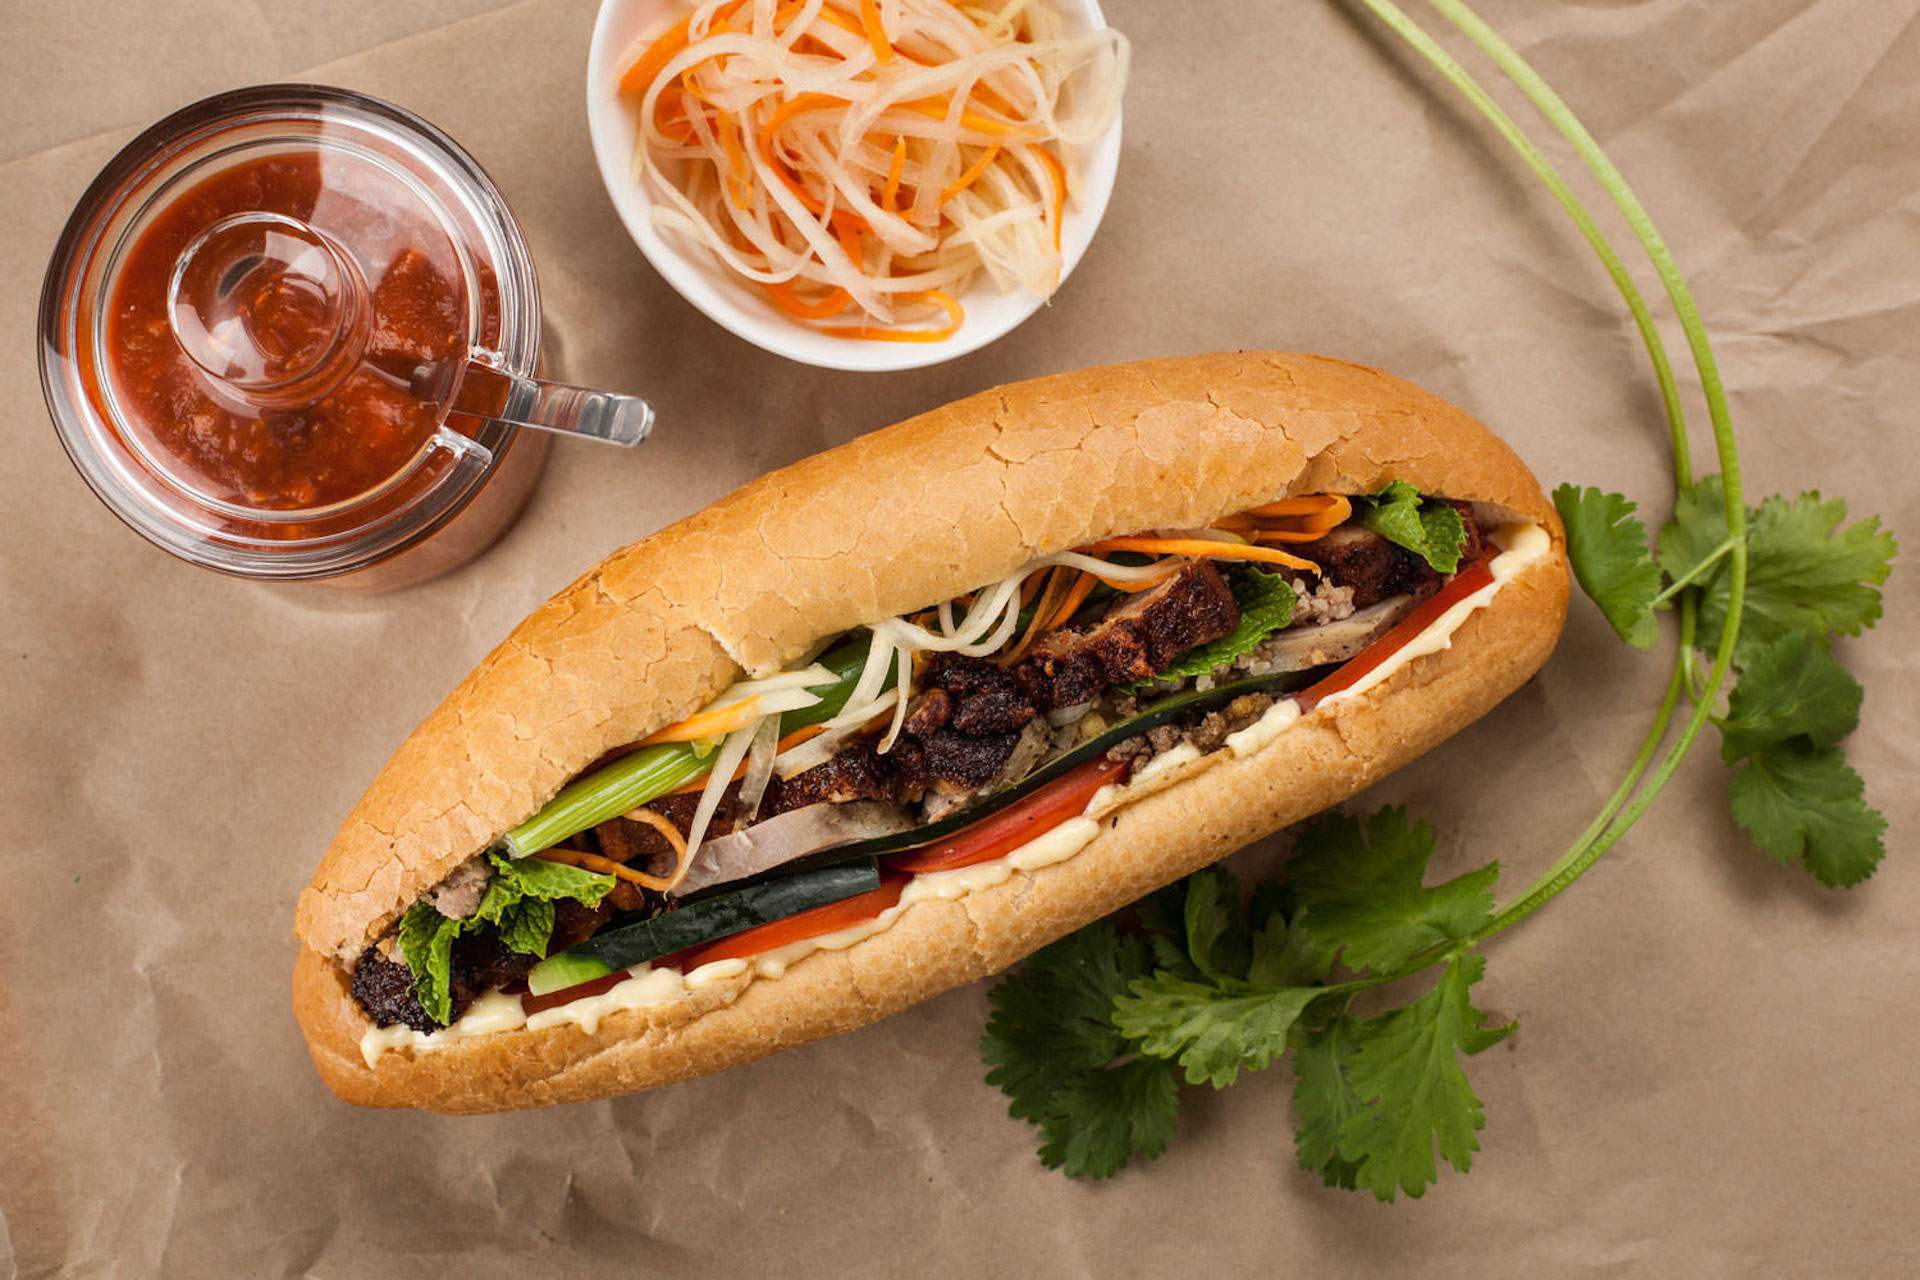 Banh Mi 25 is one of the best banh mi in old quarter Hanoi